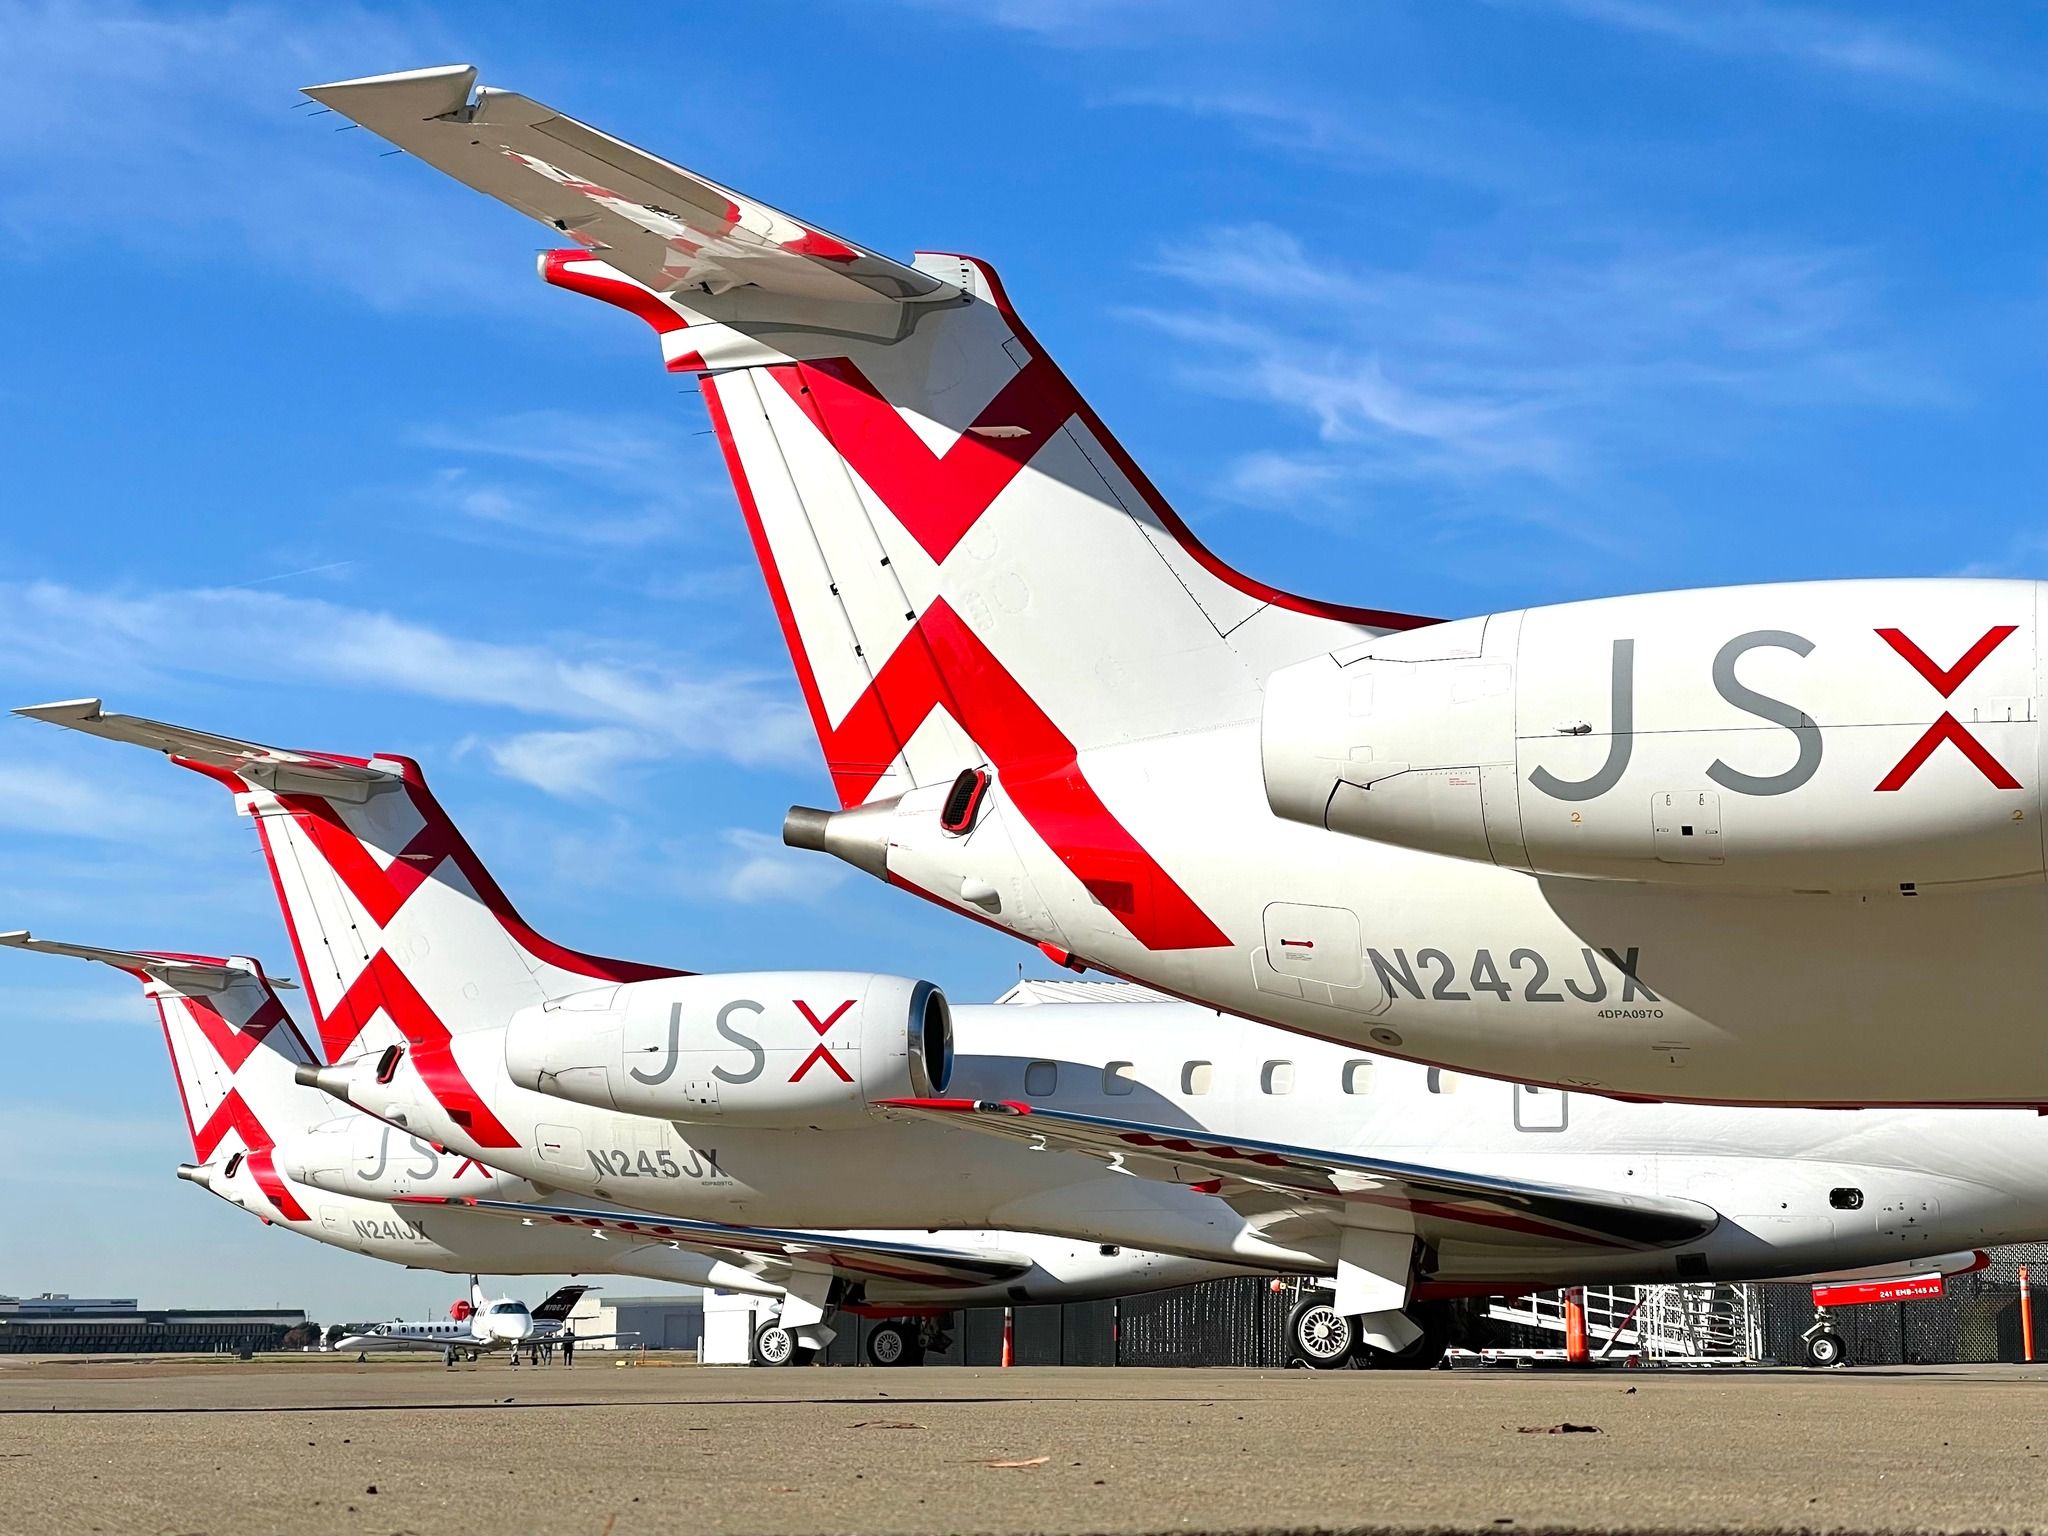 Several JSX Embraer aircraft parked on an airport apron.